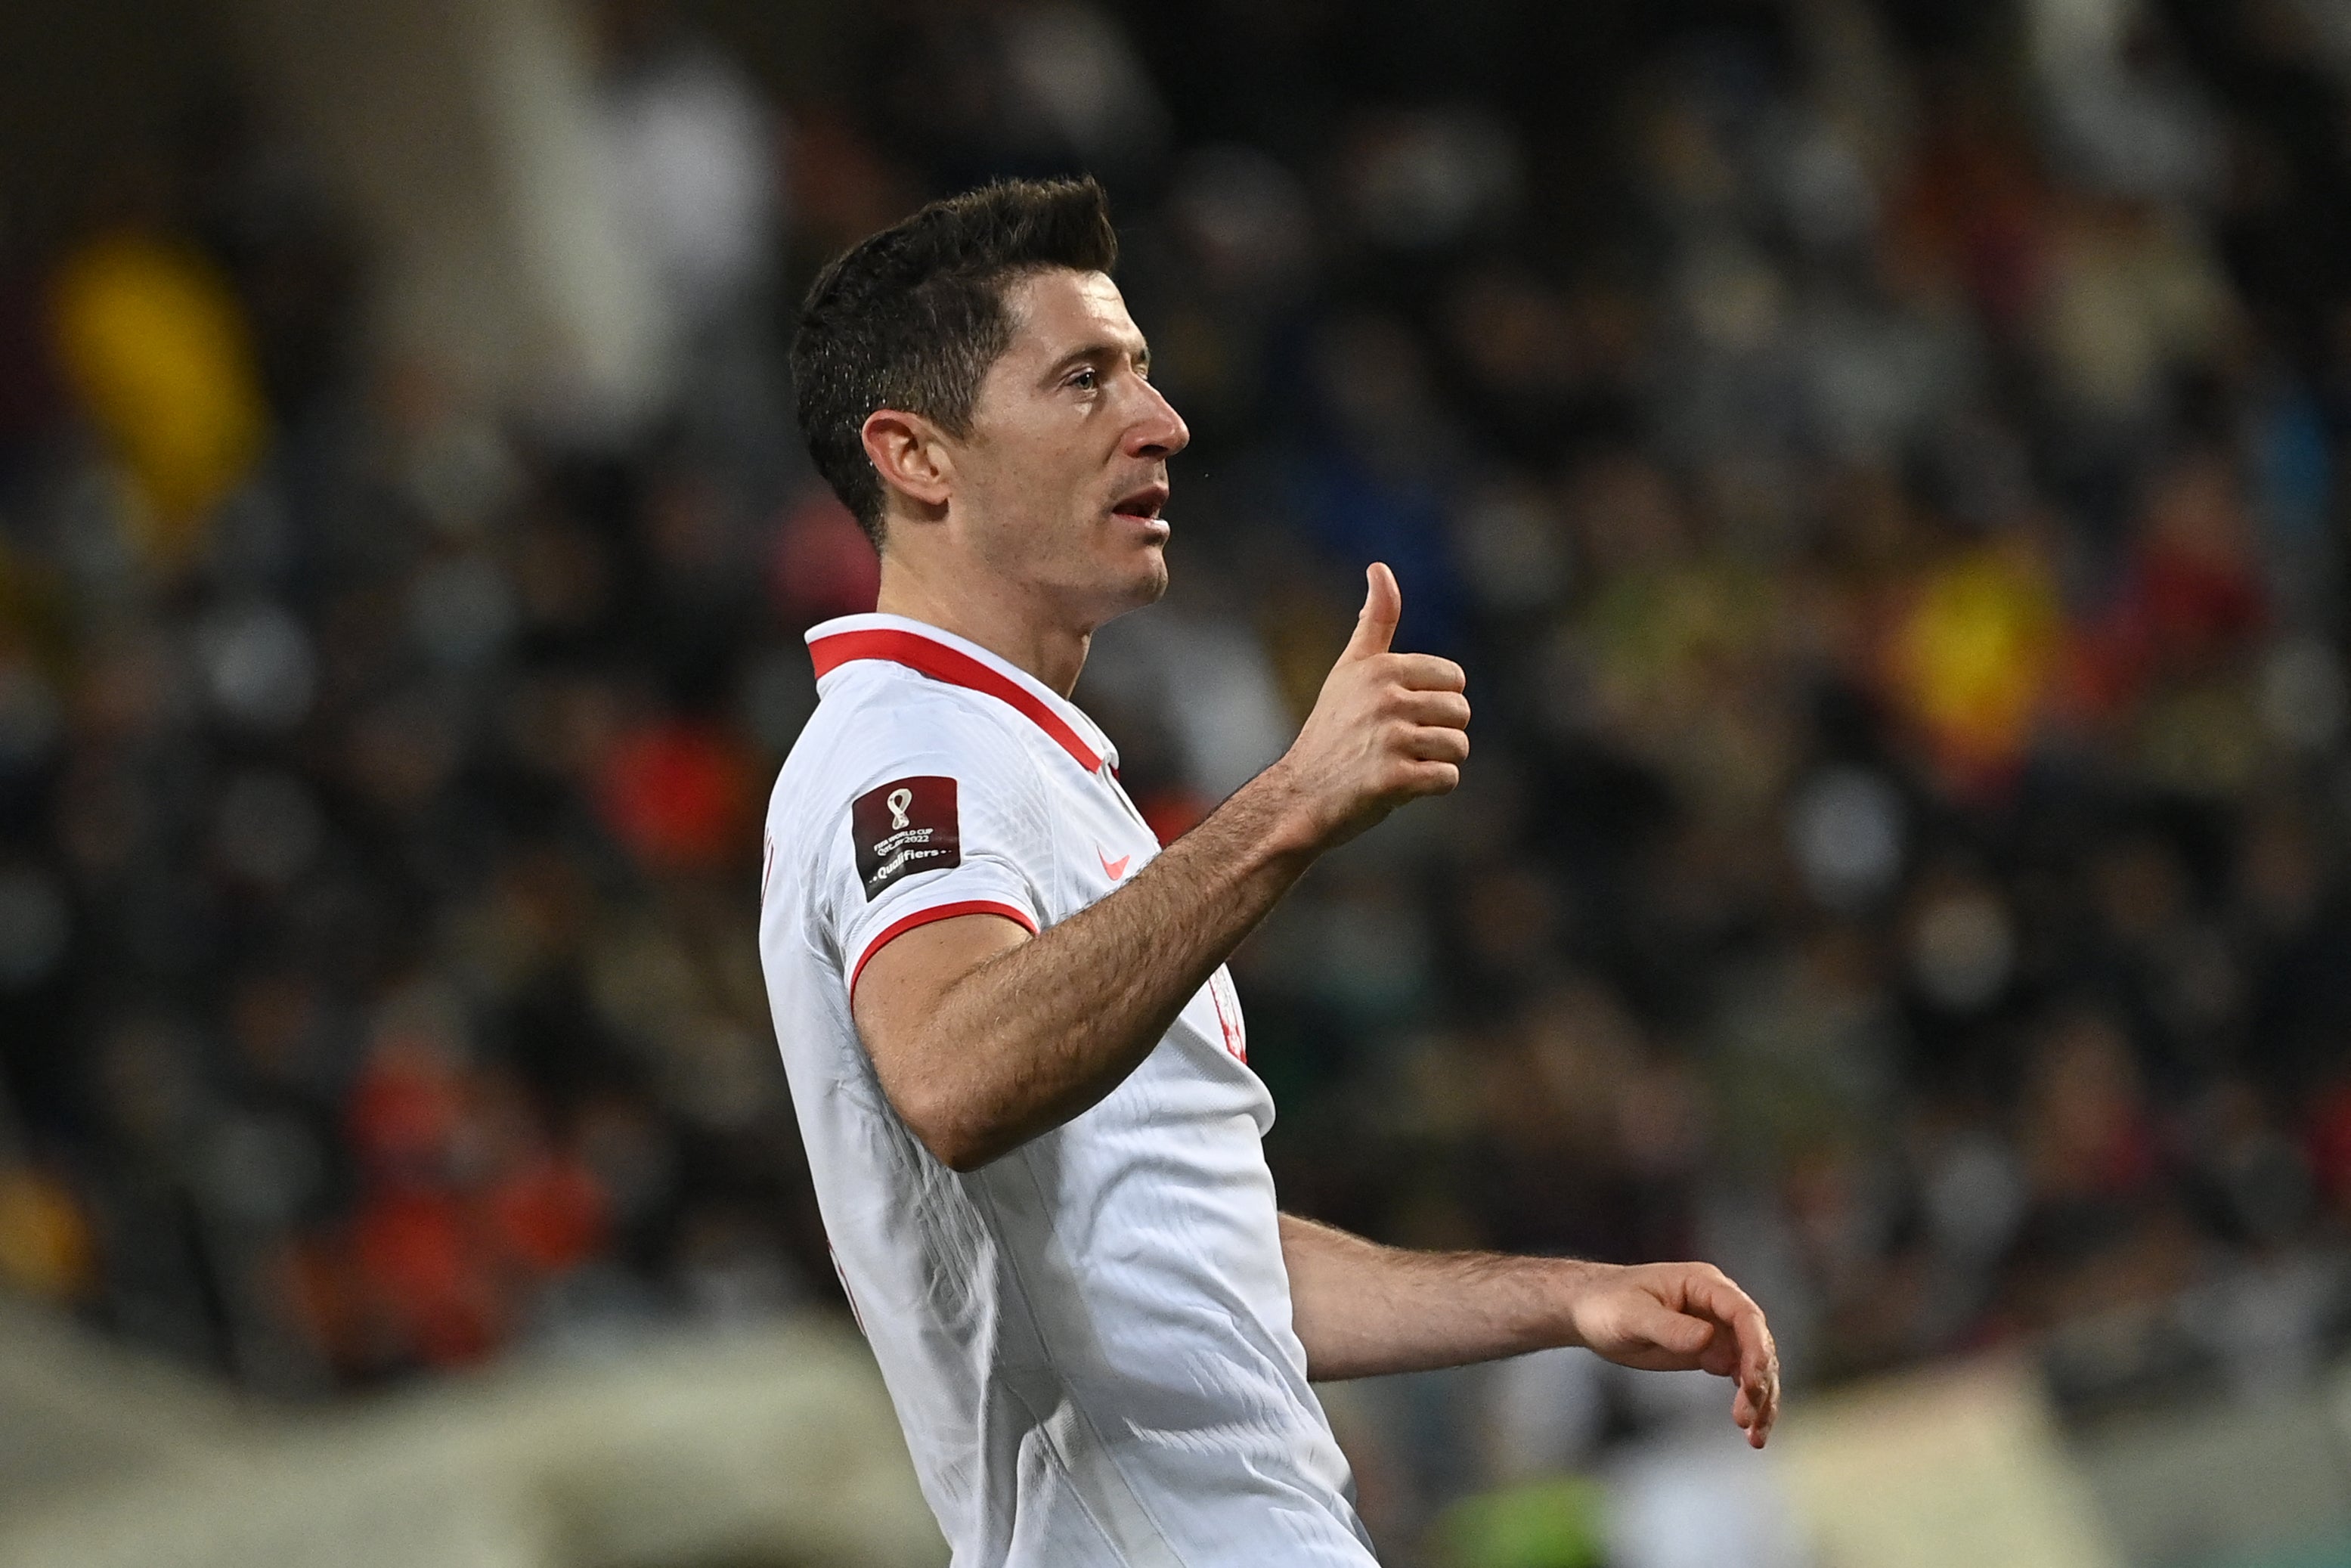 Robert Lewandowski has confirmed his intention to move from Bayern Munich